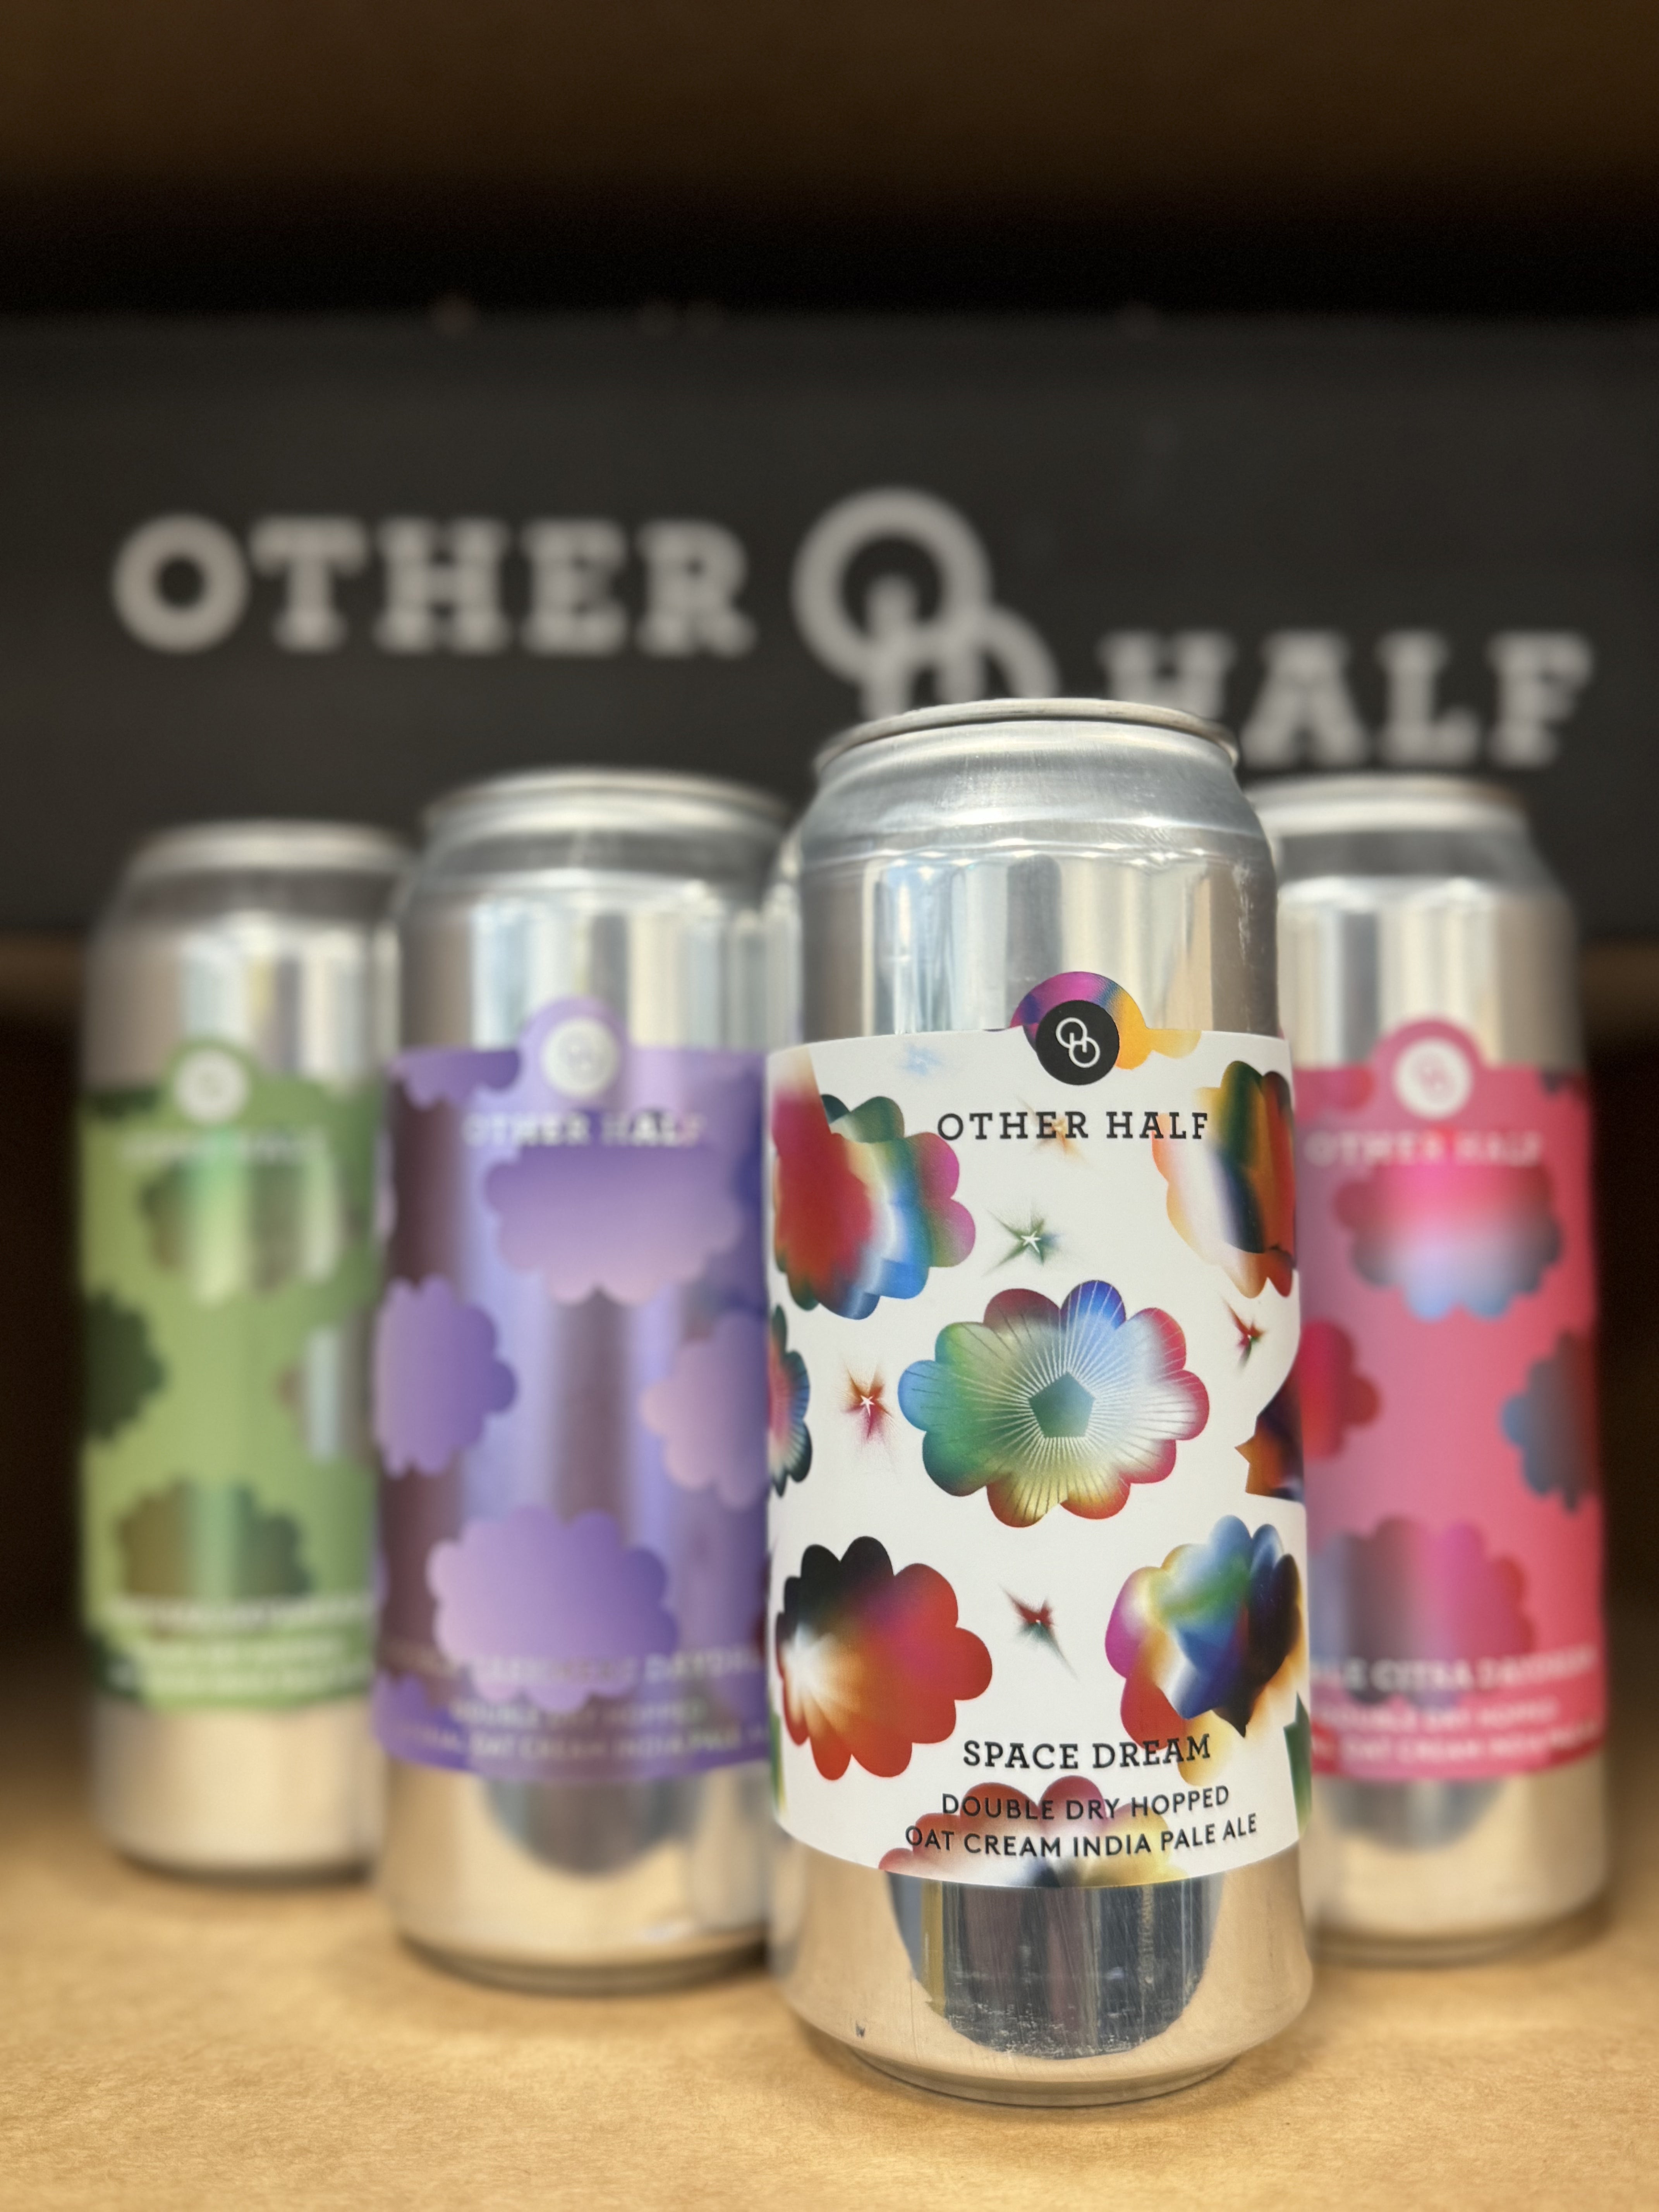 -Other Half- Other Half 🚀 Take Off Set 2-Packs & Cases- Only @ Beer Republic - The best online beer store for American & Canadian craft beer - Buy beer online from the USA and Canada - Bier online kopen - Amerikaans bier kopen - Craft beer store - Craft beer kopen - Amerikanisch bier kaufen - Bier online kaufen - Acheter biere online - IPA - Stout - Porter - New England IPA - Hazy IPA - Imperial Stout - Barrel Aged - Barrel Aged Imperial Stout - Brown - Dark beer - Blond - Blonde - Pilsner - Lager - Wheat -